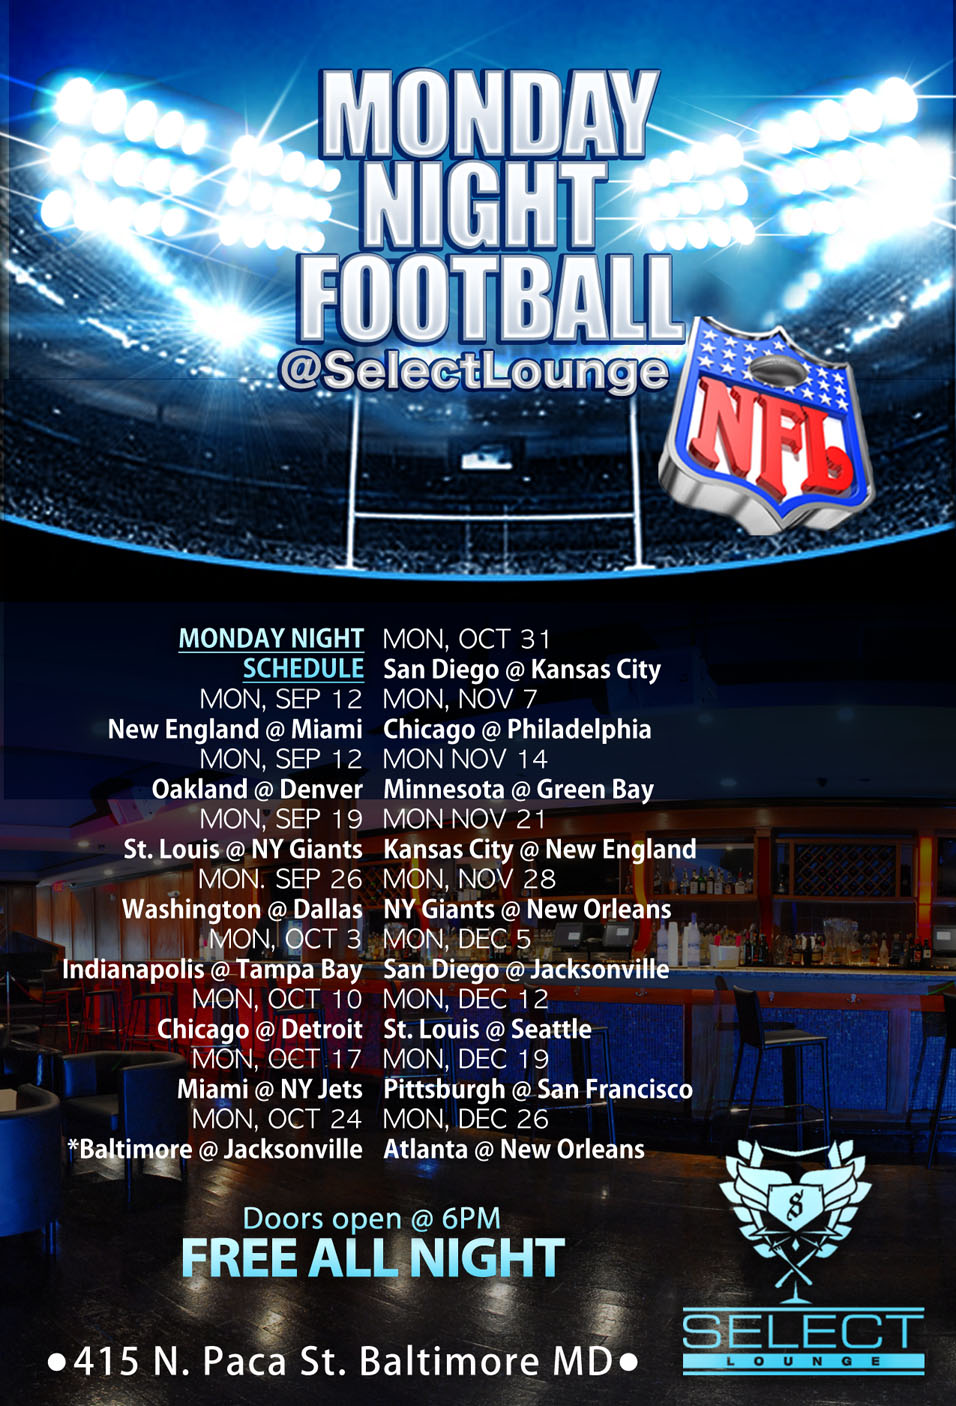 Download this Monday Night Football Every Select Lounge Redskins picture